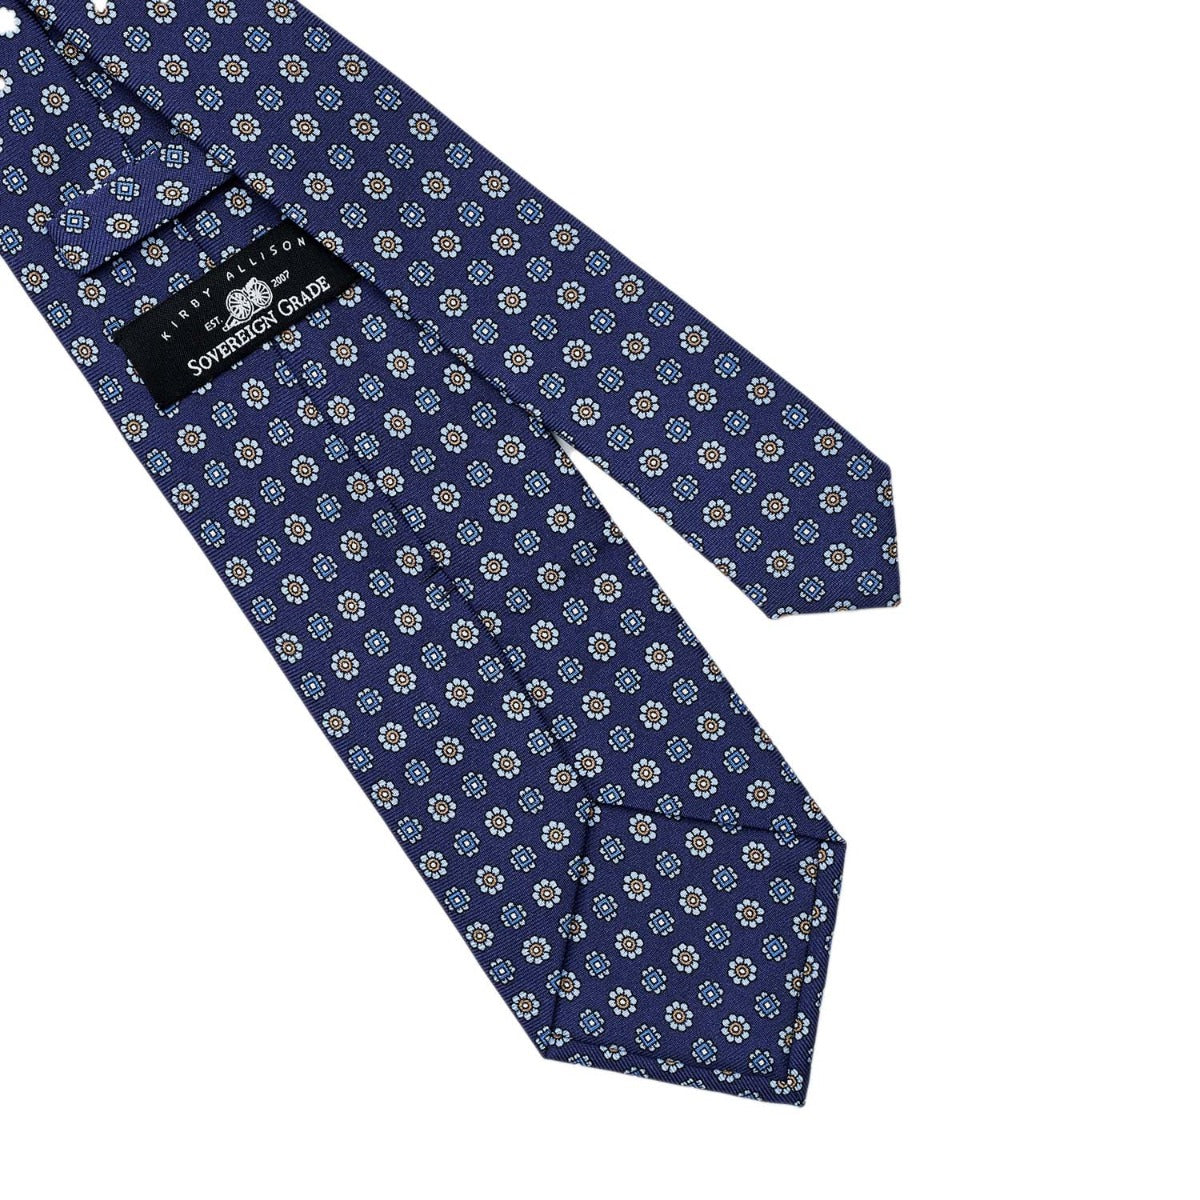 A handmade Sovereign Grade Navy Floral 36oz Printed Silk Tie with a pattern on it, made of 100% English silk (from the KirbyAllison.com ties collection).